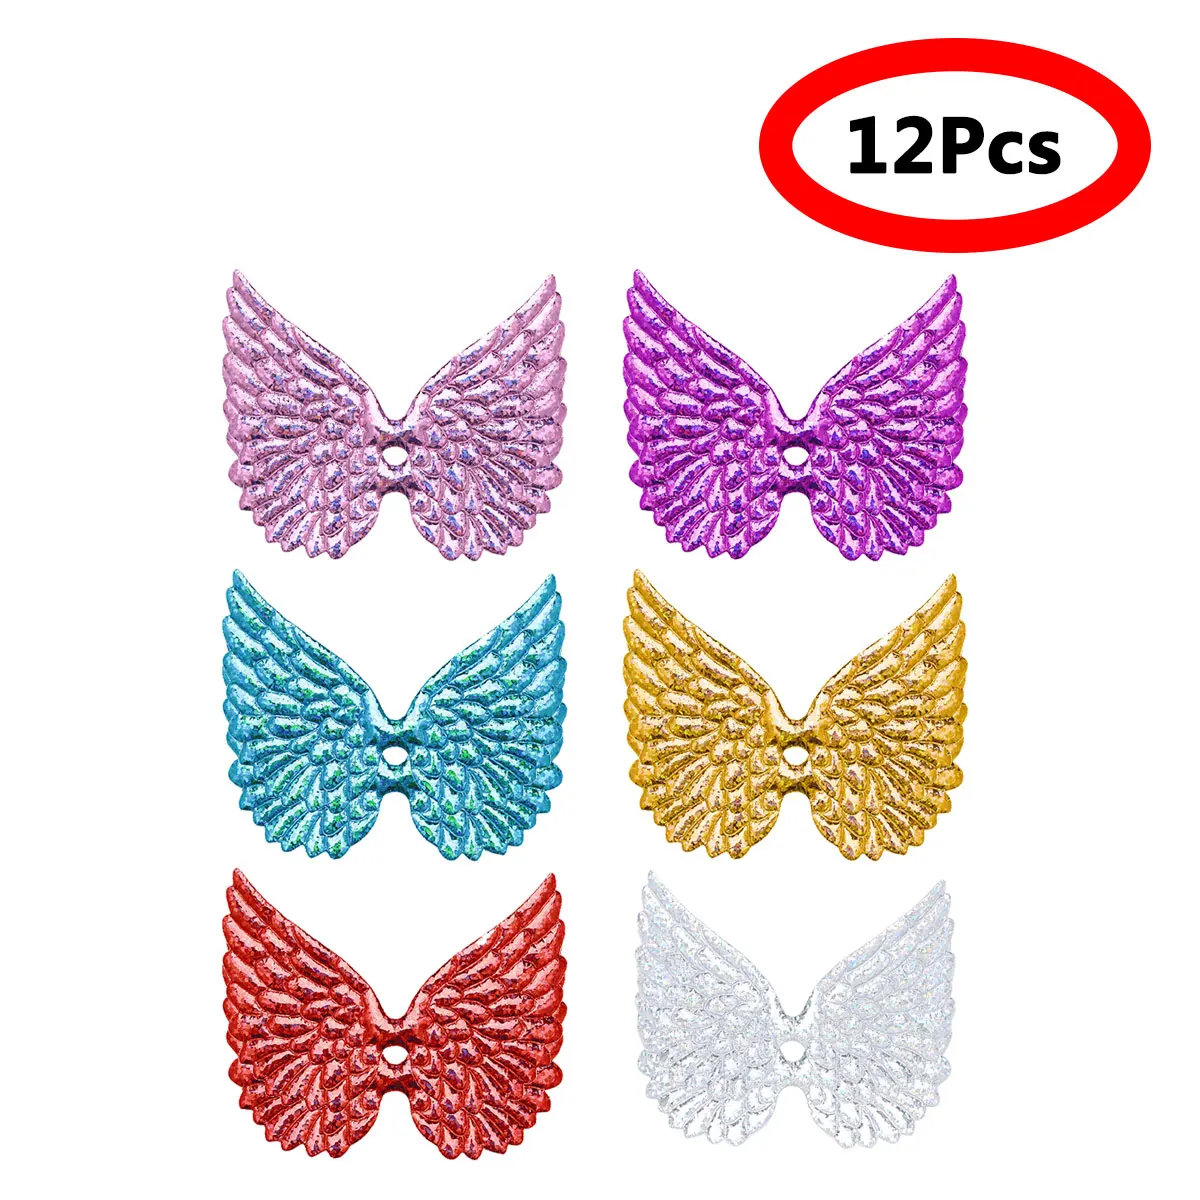 

12Pcs DIY Angel Wings Patches Crafts Shiny Holographic Embossed Fabric Applique Sewing Patch Supplies for Bag Clothes Decoration